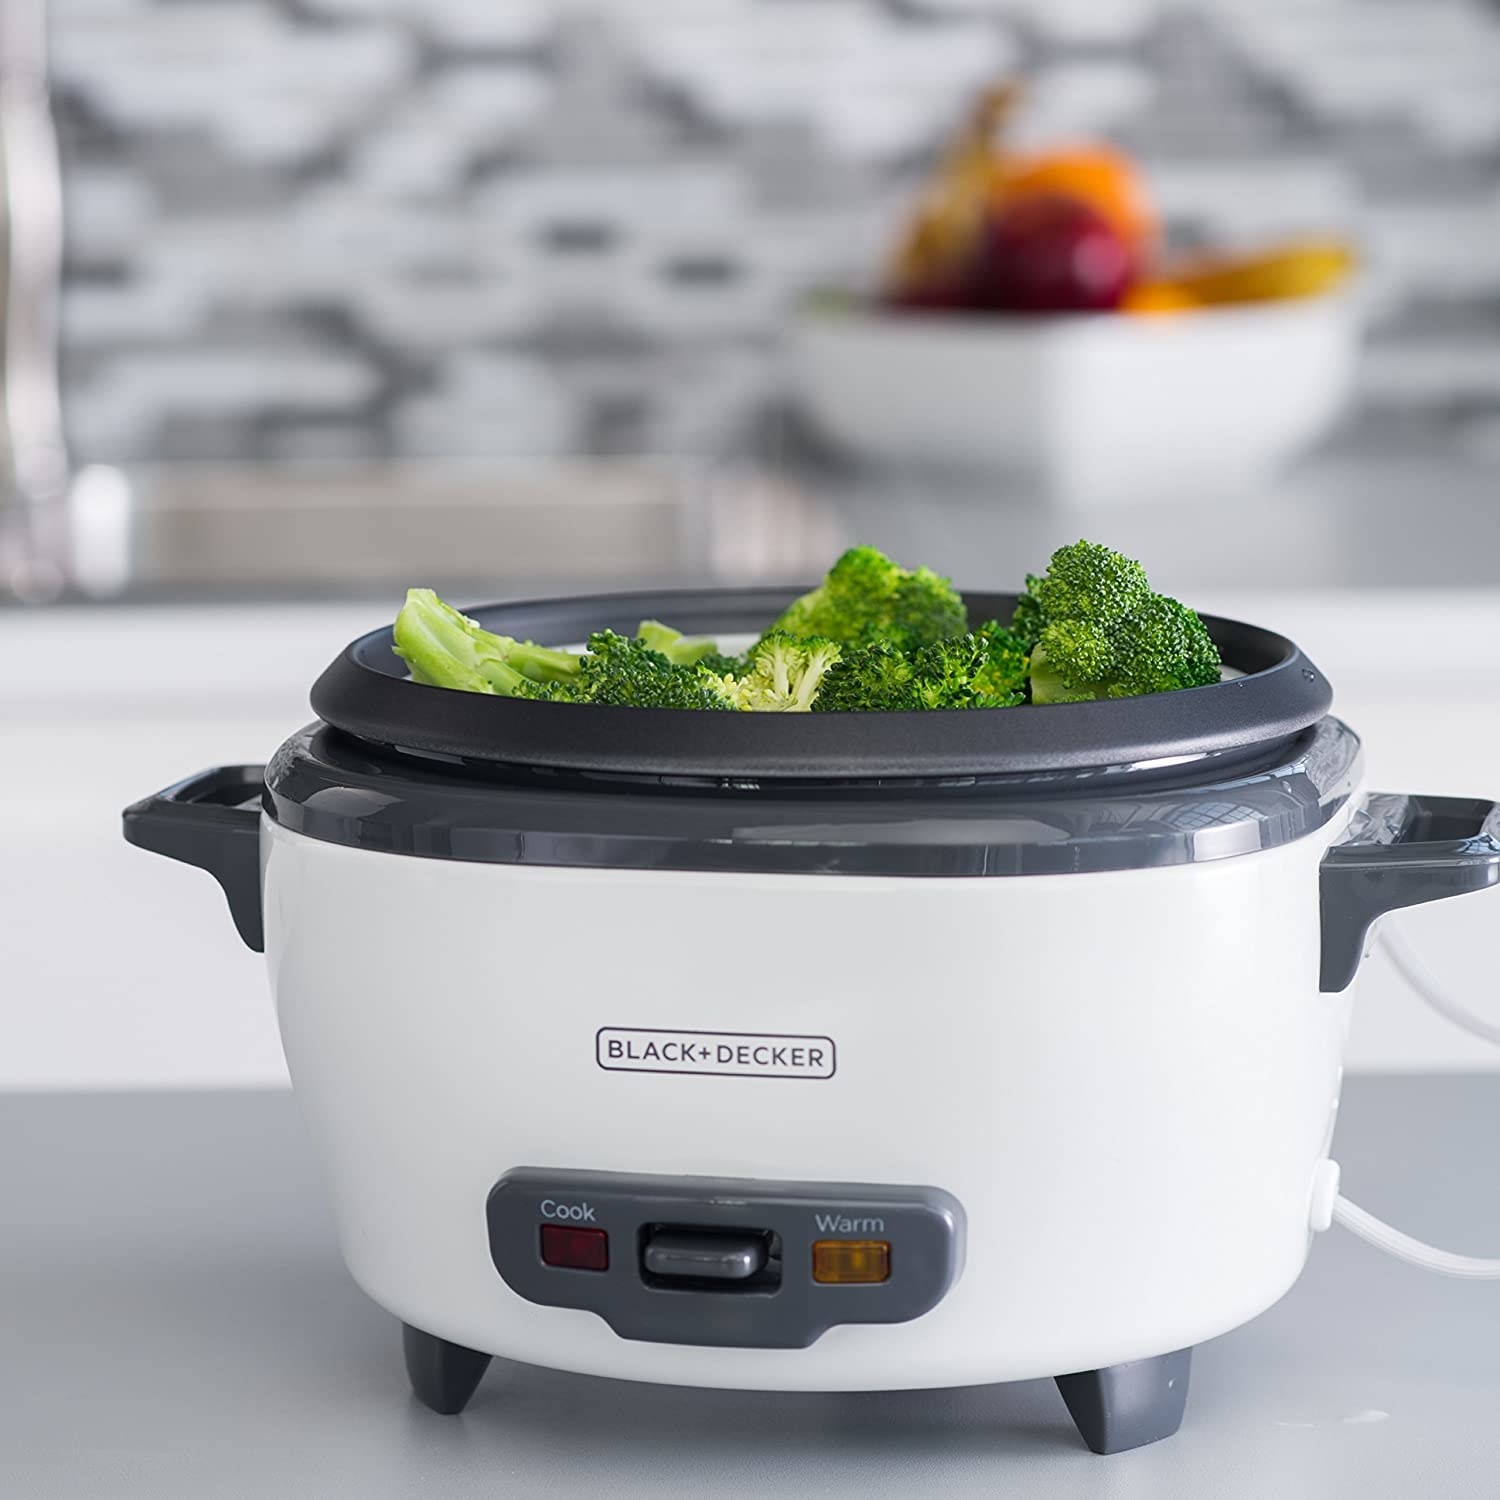 the rice cooker with broccoli in it